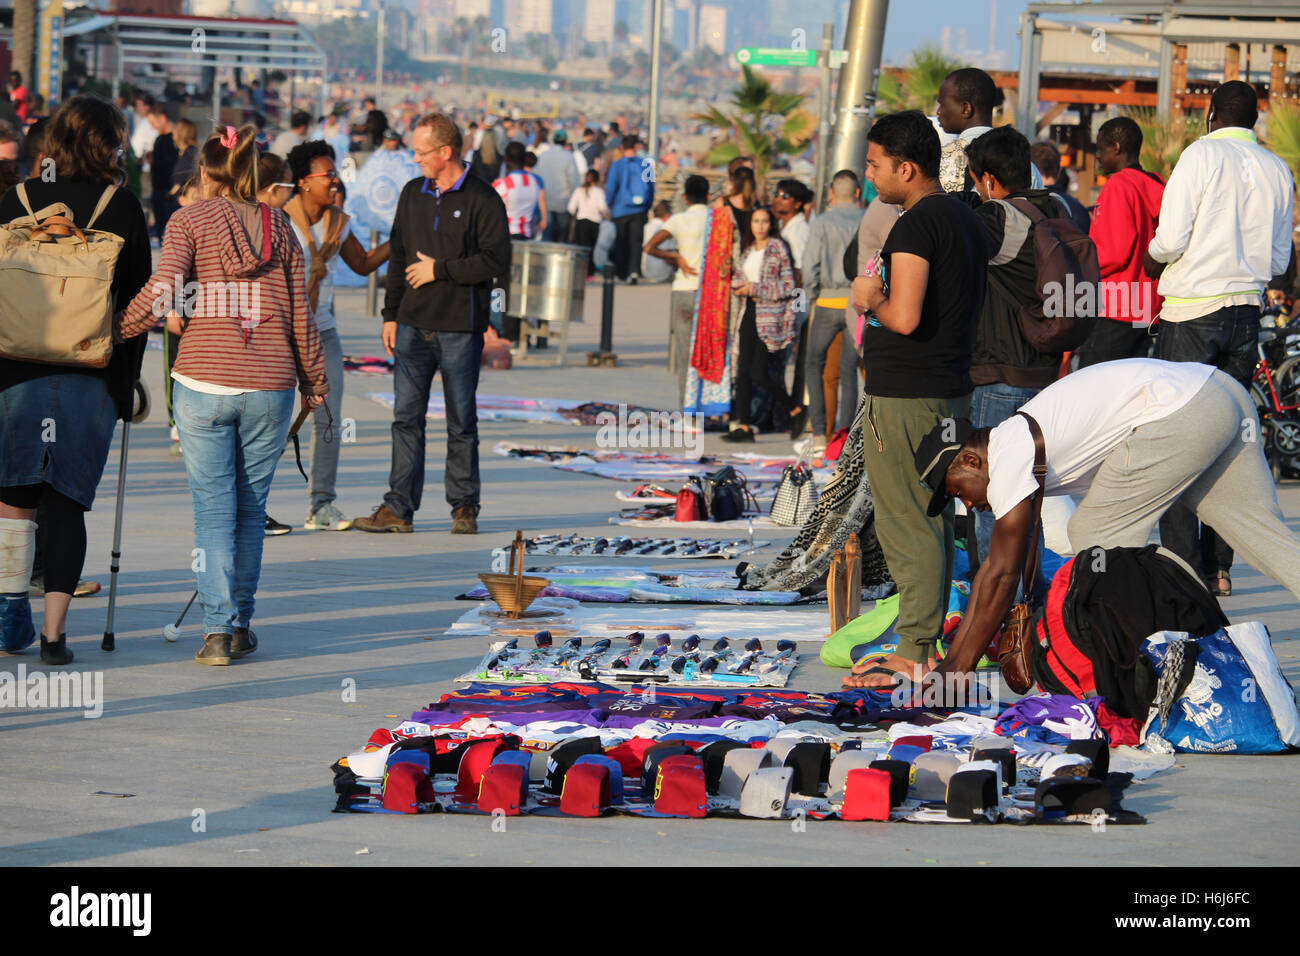 Barcelona, Spain - October 29, 2016: Illegal sellers of fake branded clothes on the Barceloneta beach. Although it is illegal, the phenomenon called 'top manta' is extended in central Barcelona, with hundreds of street sellers in the most popular tourist locations of the city Credit:  Dino Geromella/Alamy Live News Stock Photo